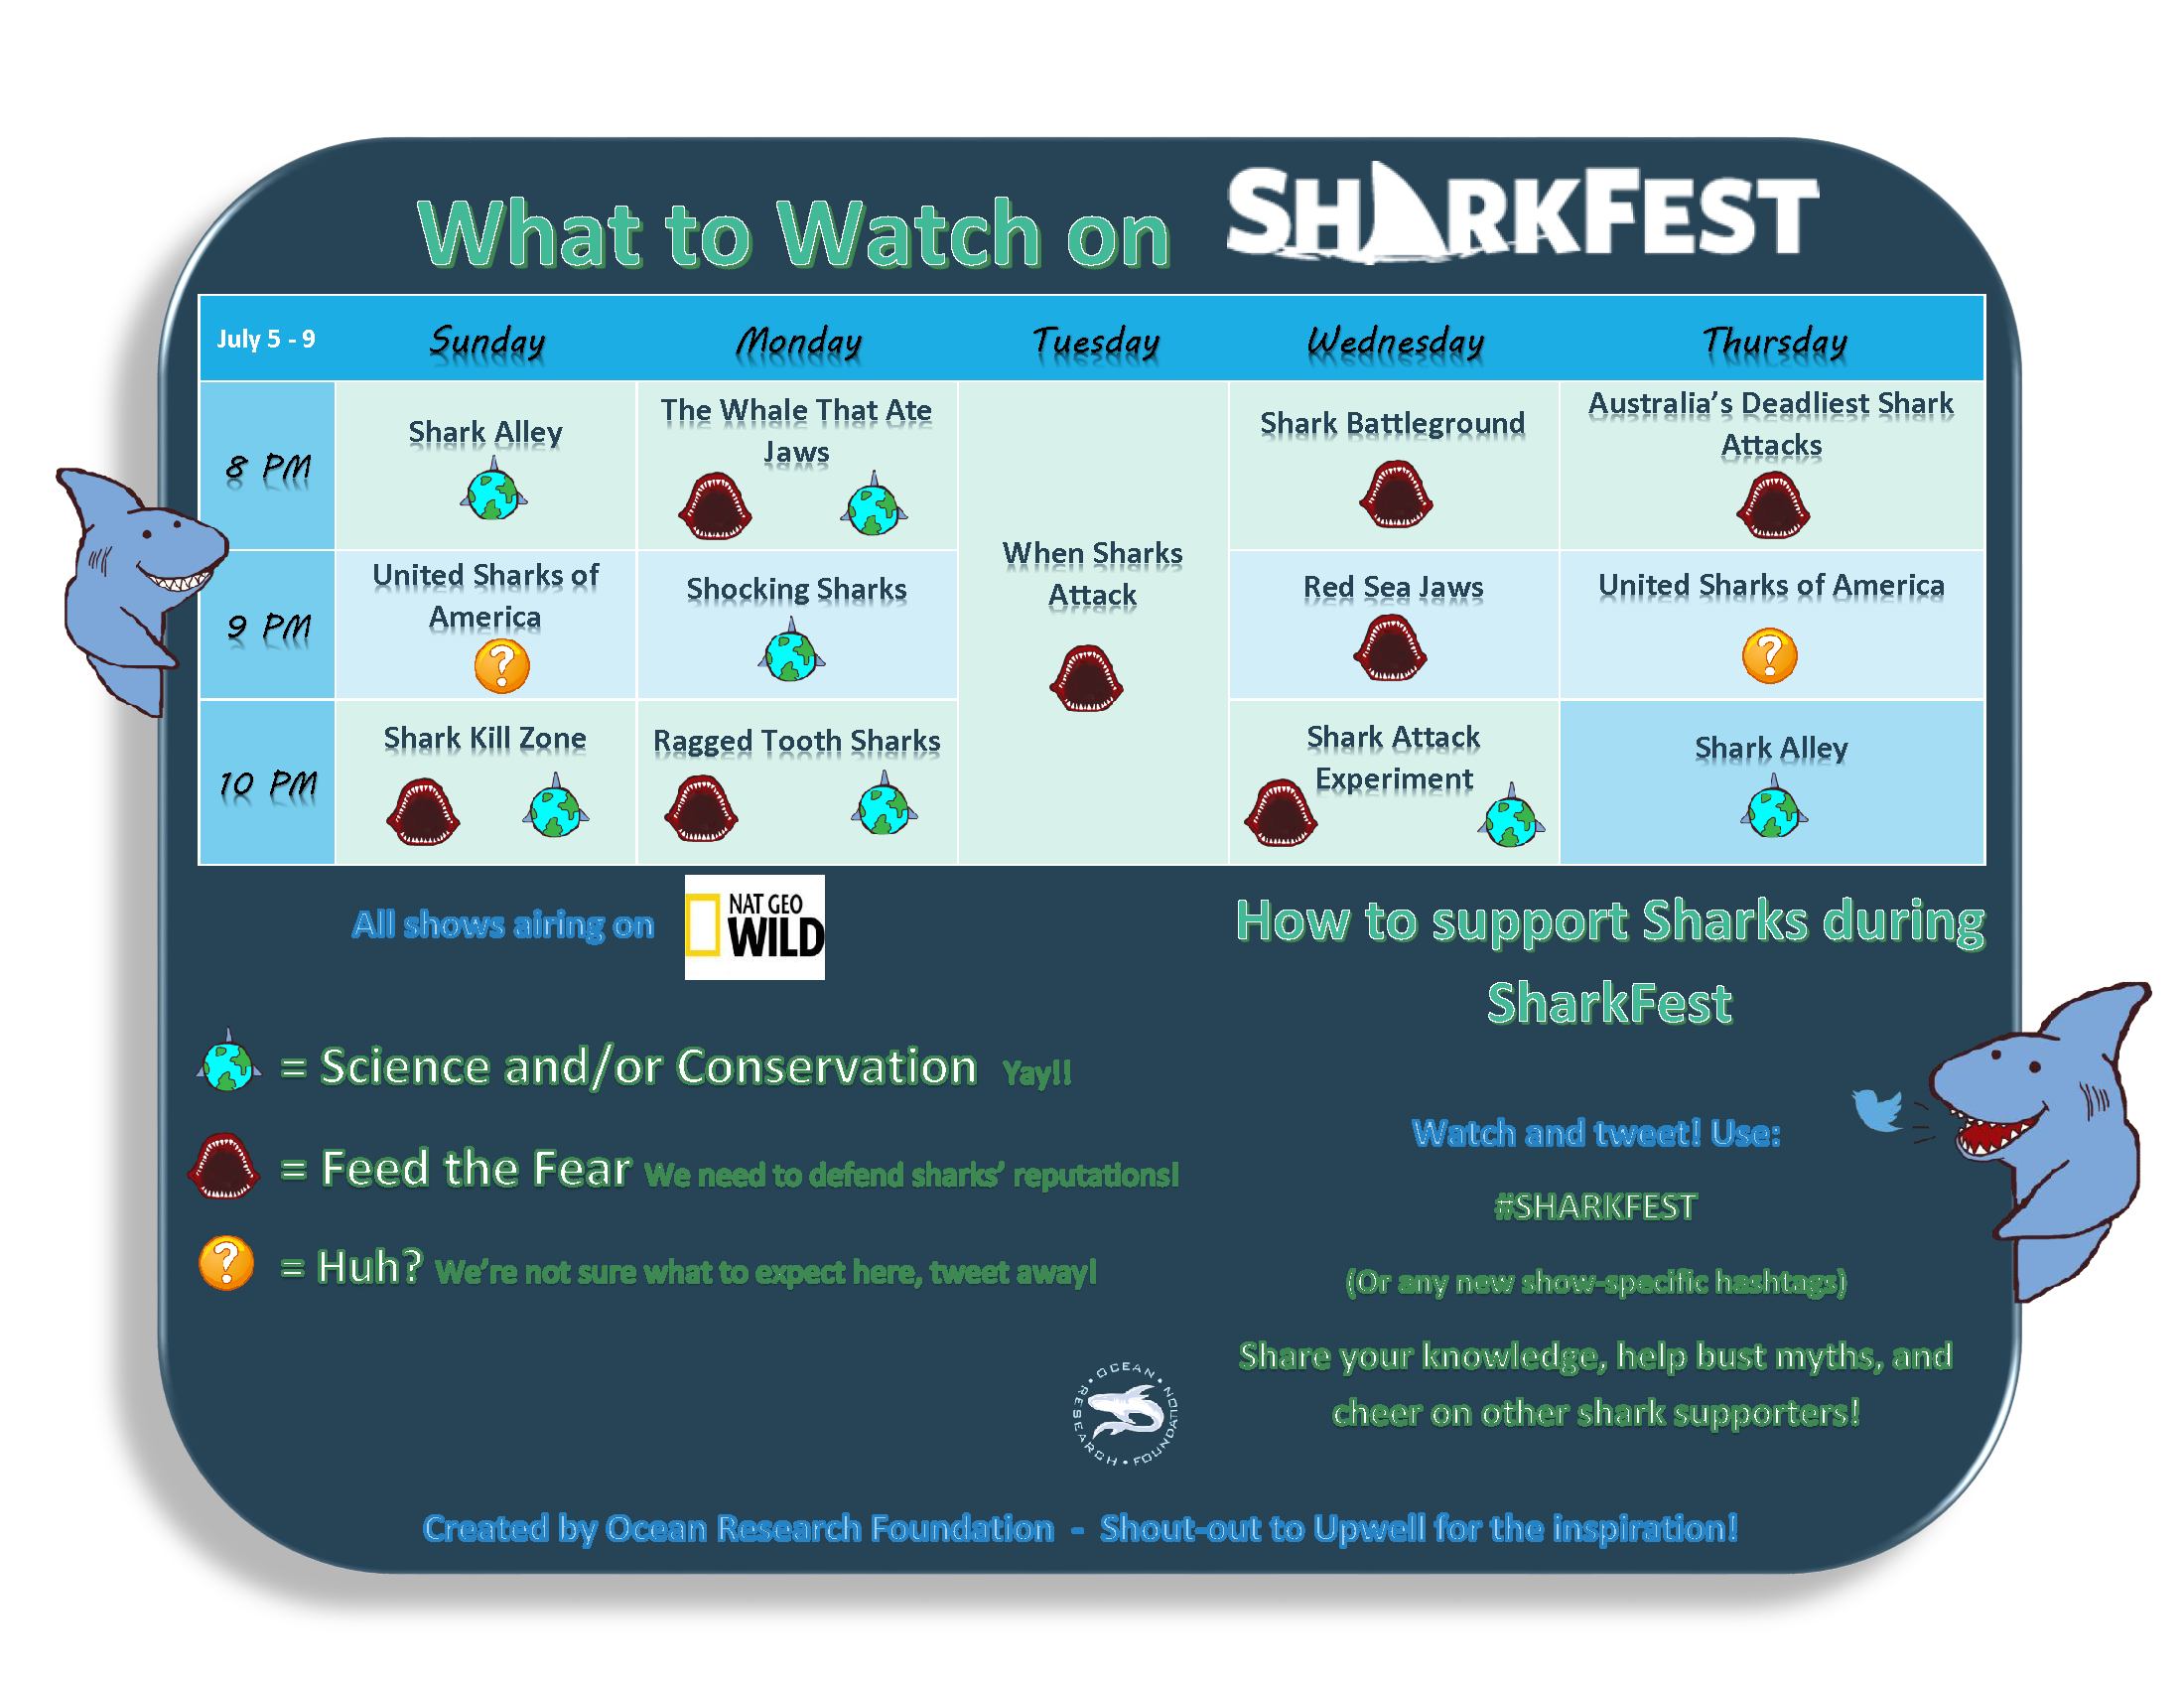 #WhatToWatch for #SharkFest2015 Image created by Shelley Davis of the Ocean Research Foundation. 